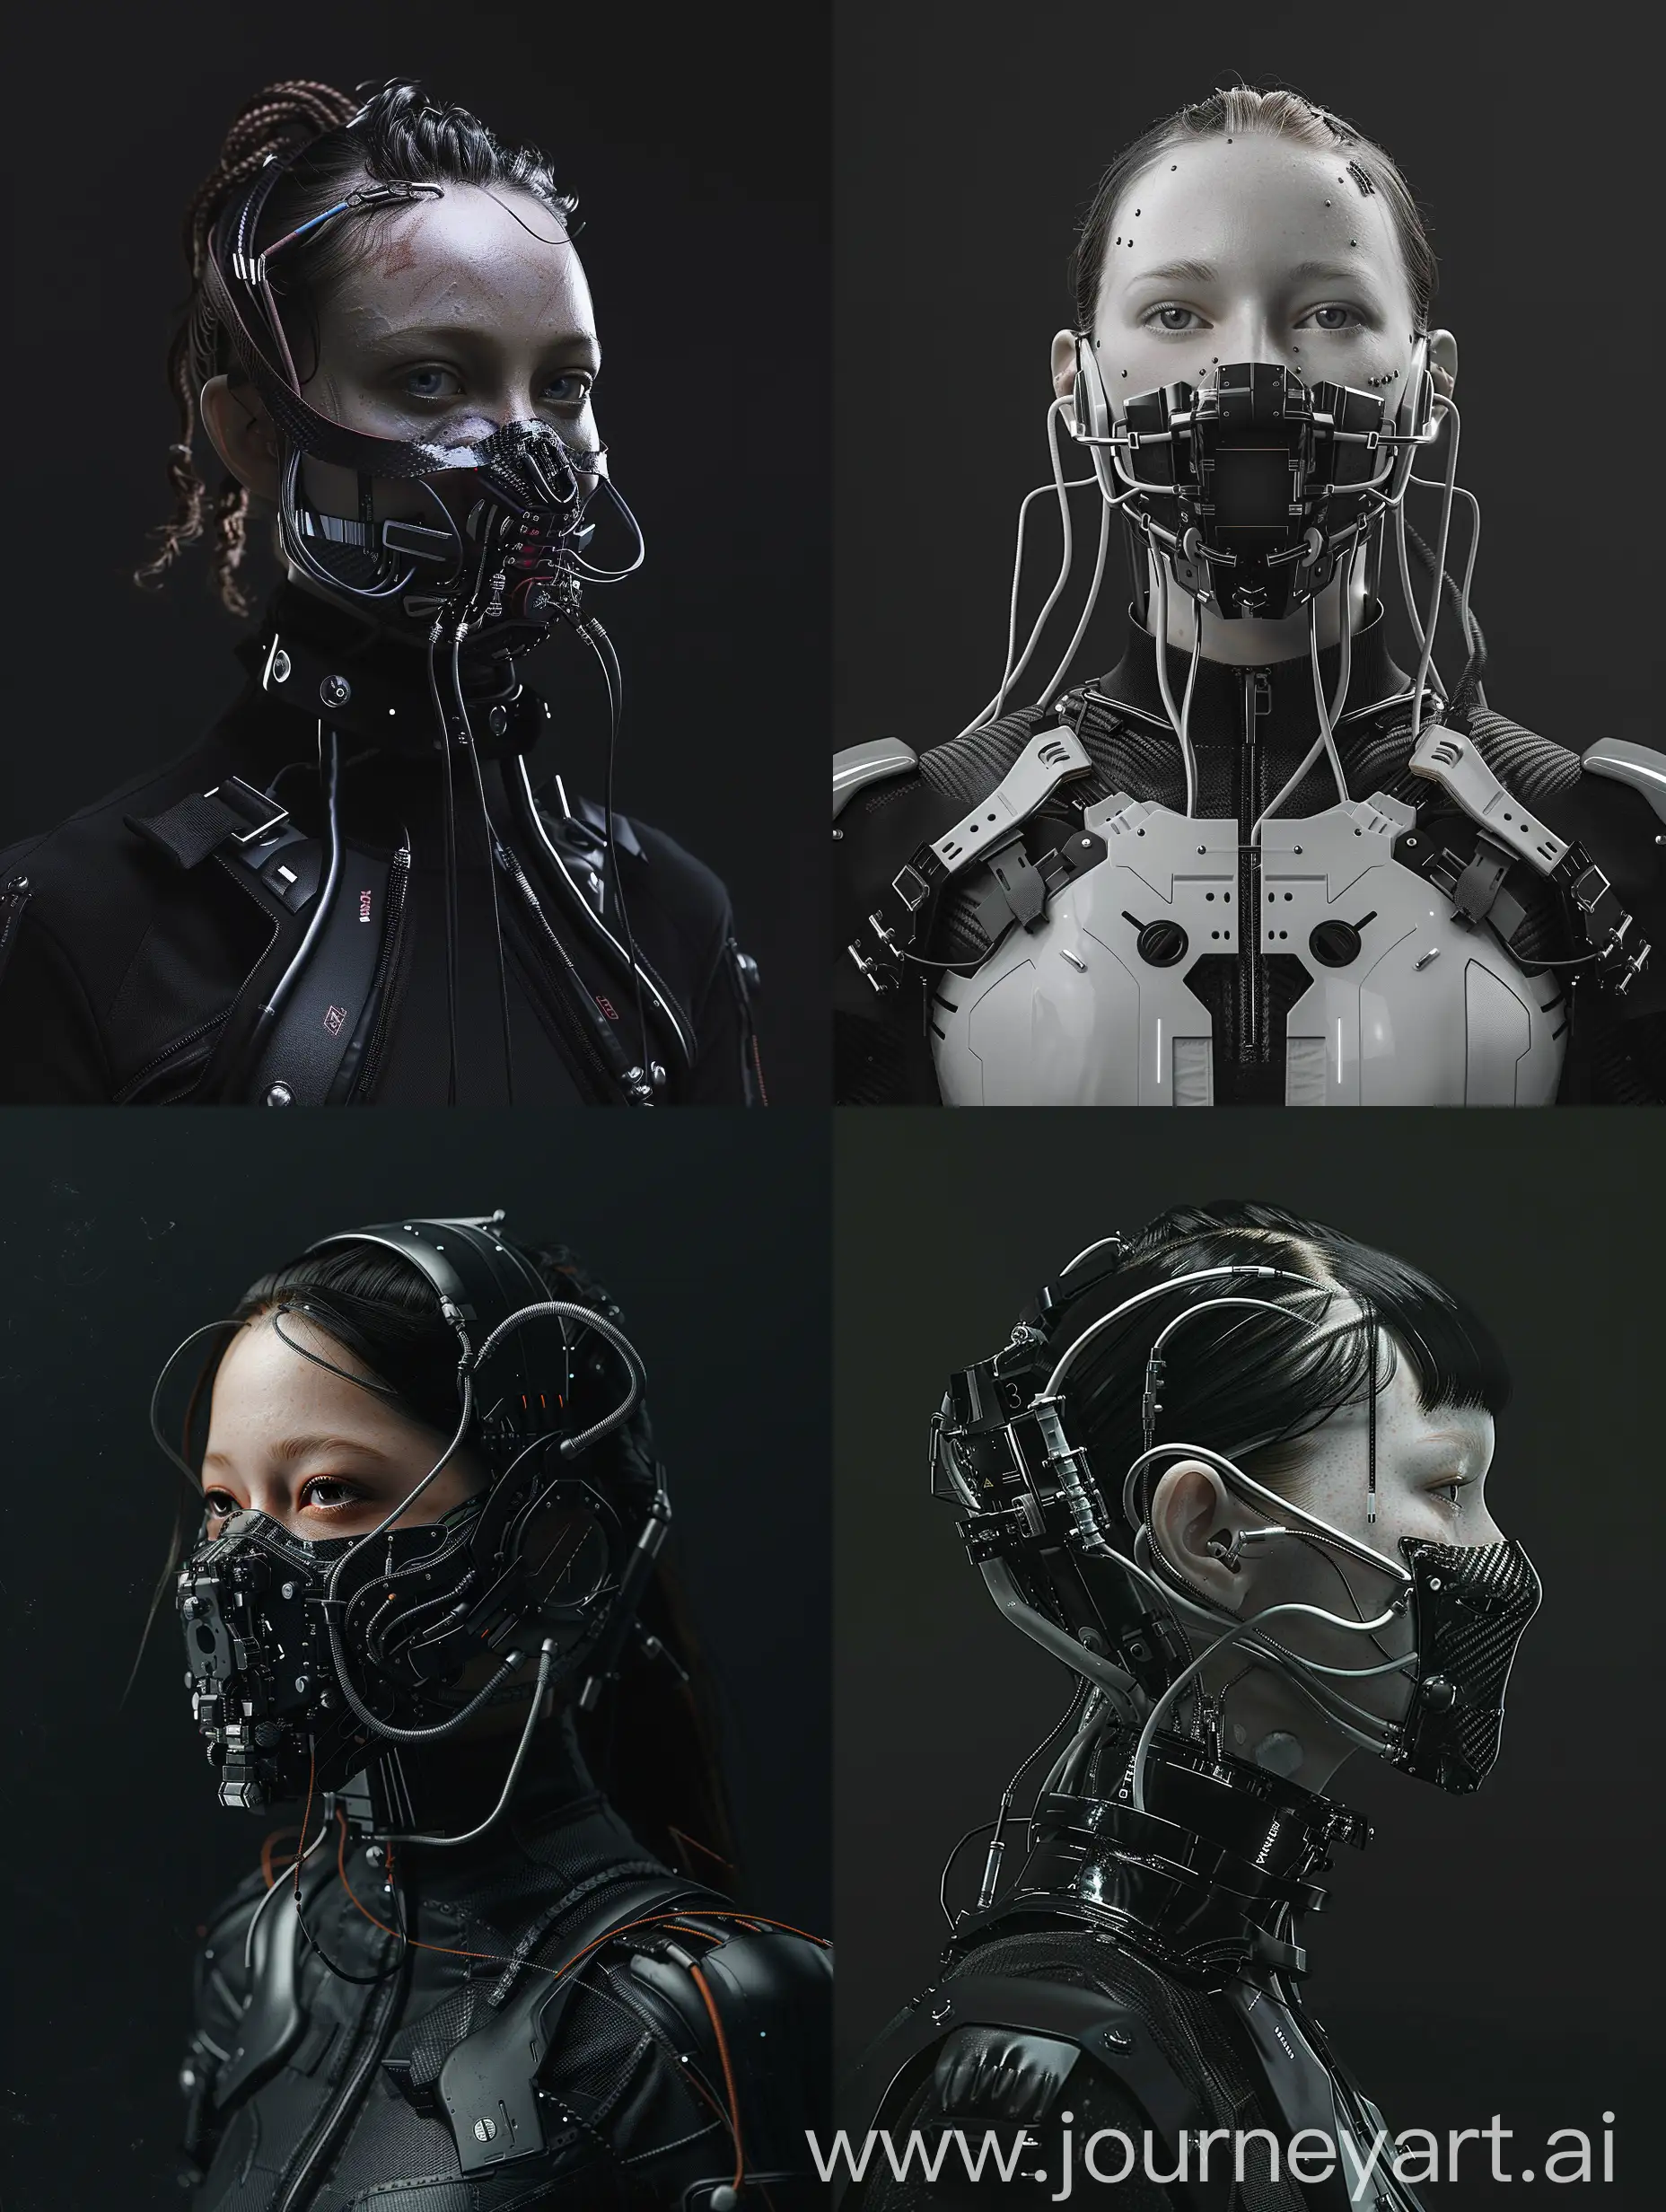 Futuristic-Cyberpunk-Character-with-Intricate-Cybernetic-Mask-and-Carbon-Fiber-Textures